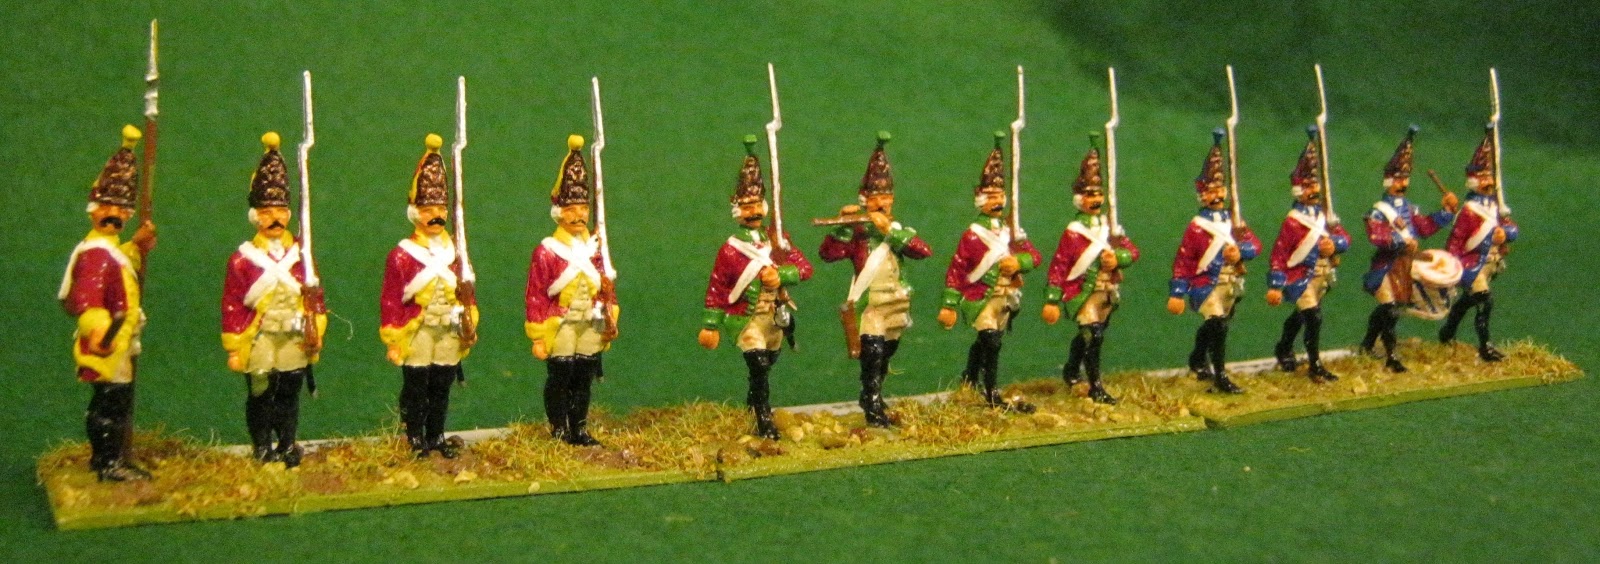 Green, Yellow & Blue Regiments of Blades